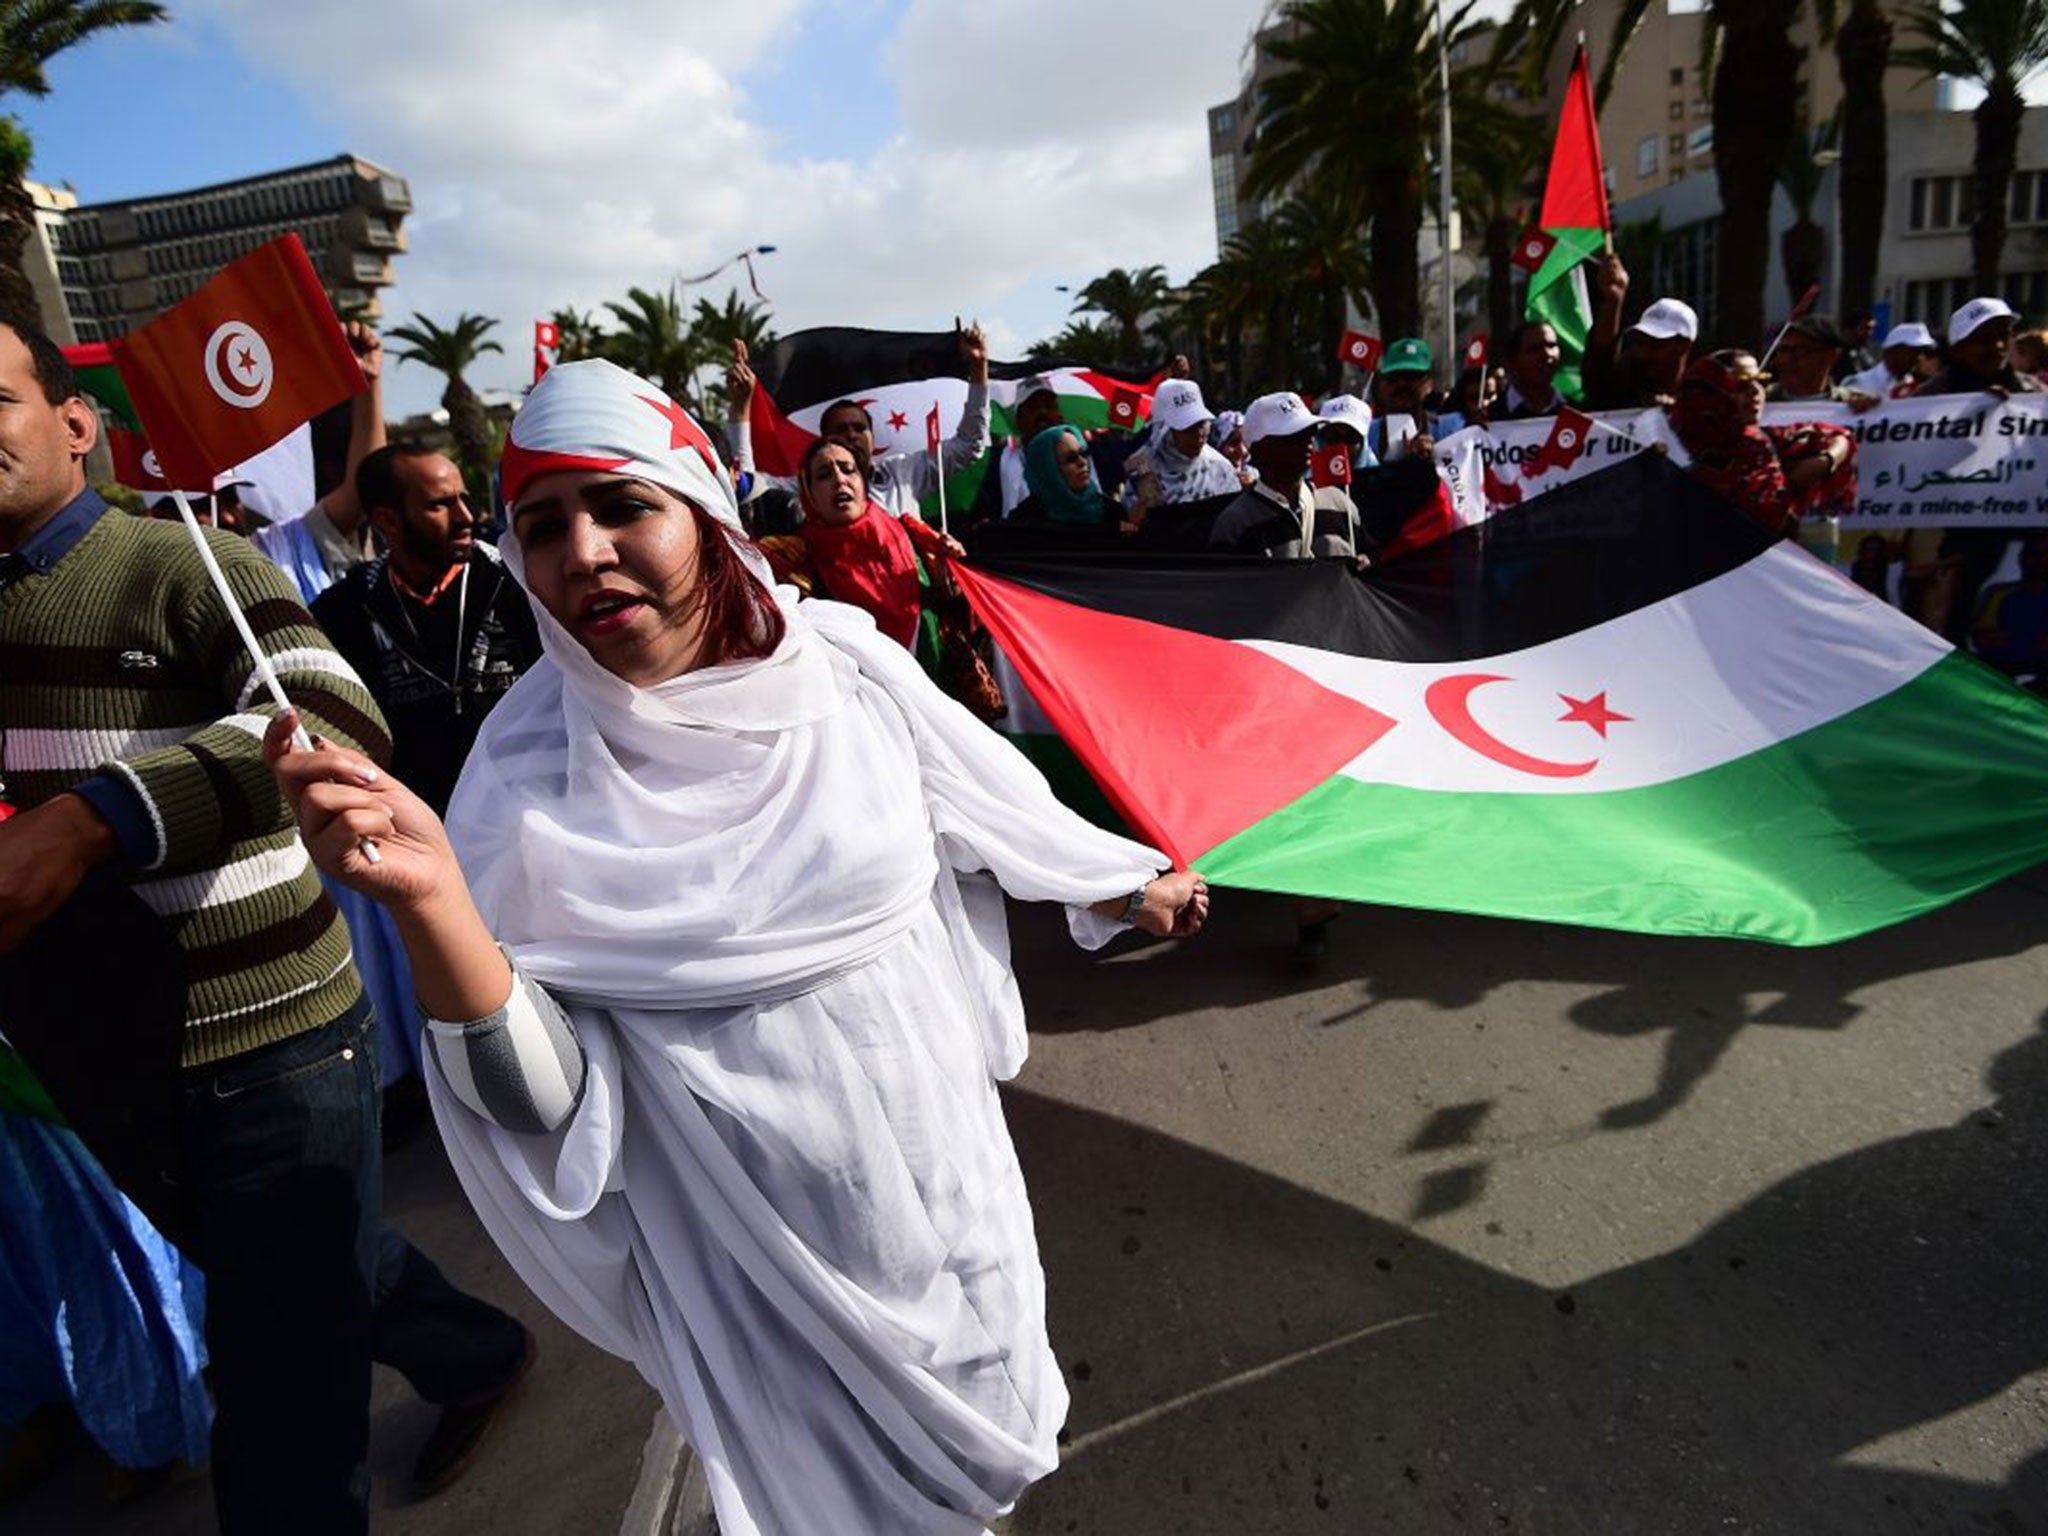 Activists for the independence of the Western Sahara wave flags and banners during a protest